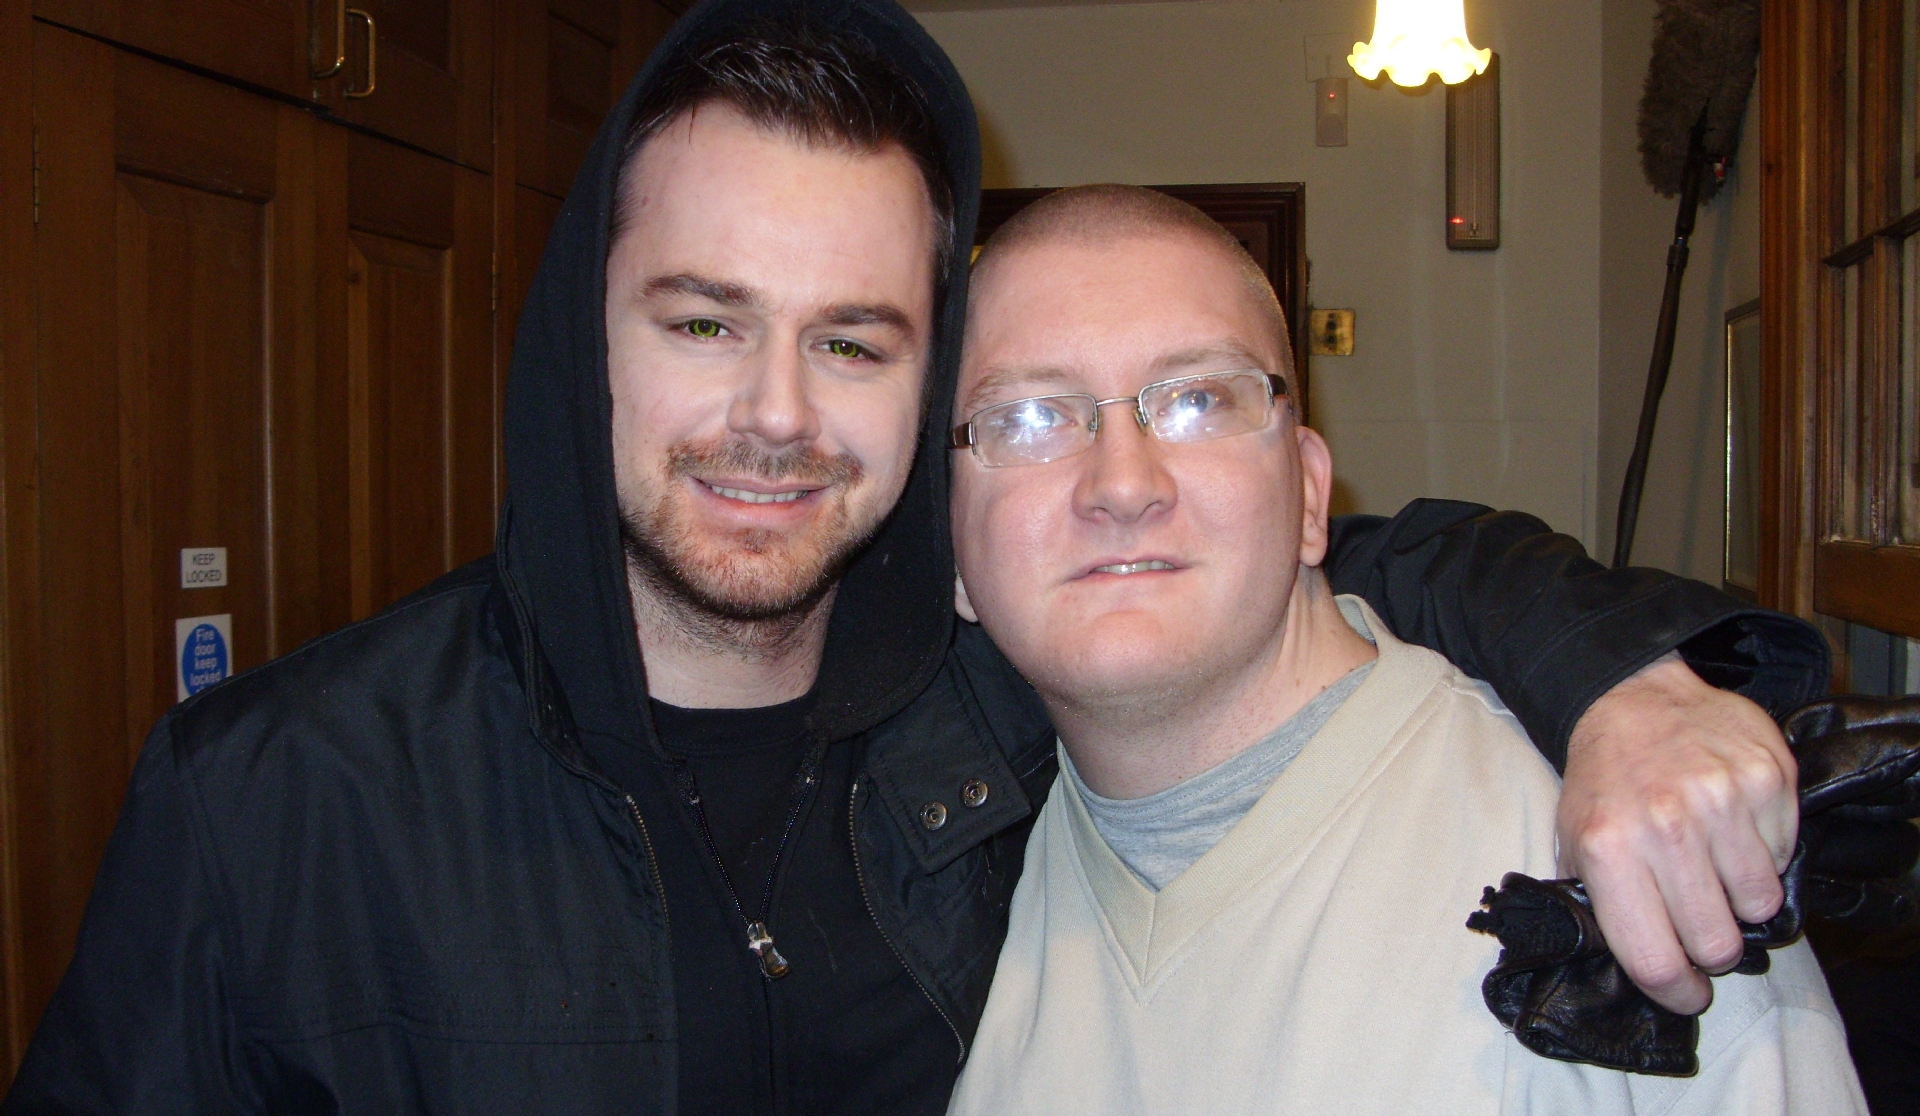 With Danny Dyer, who Samuel has worked with on 